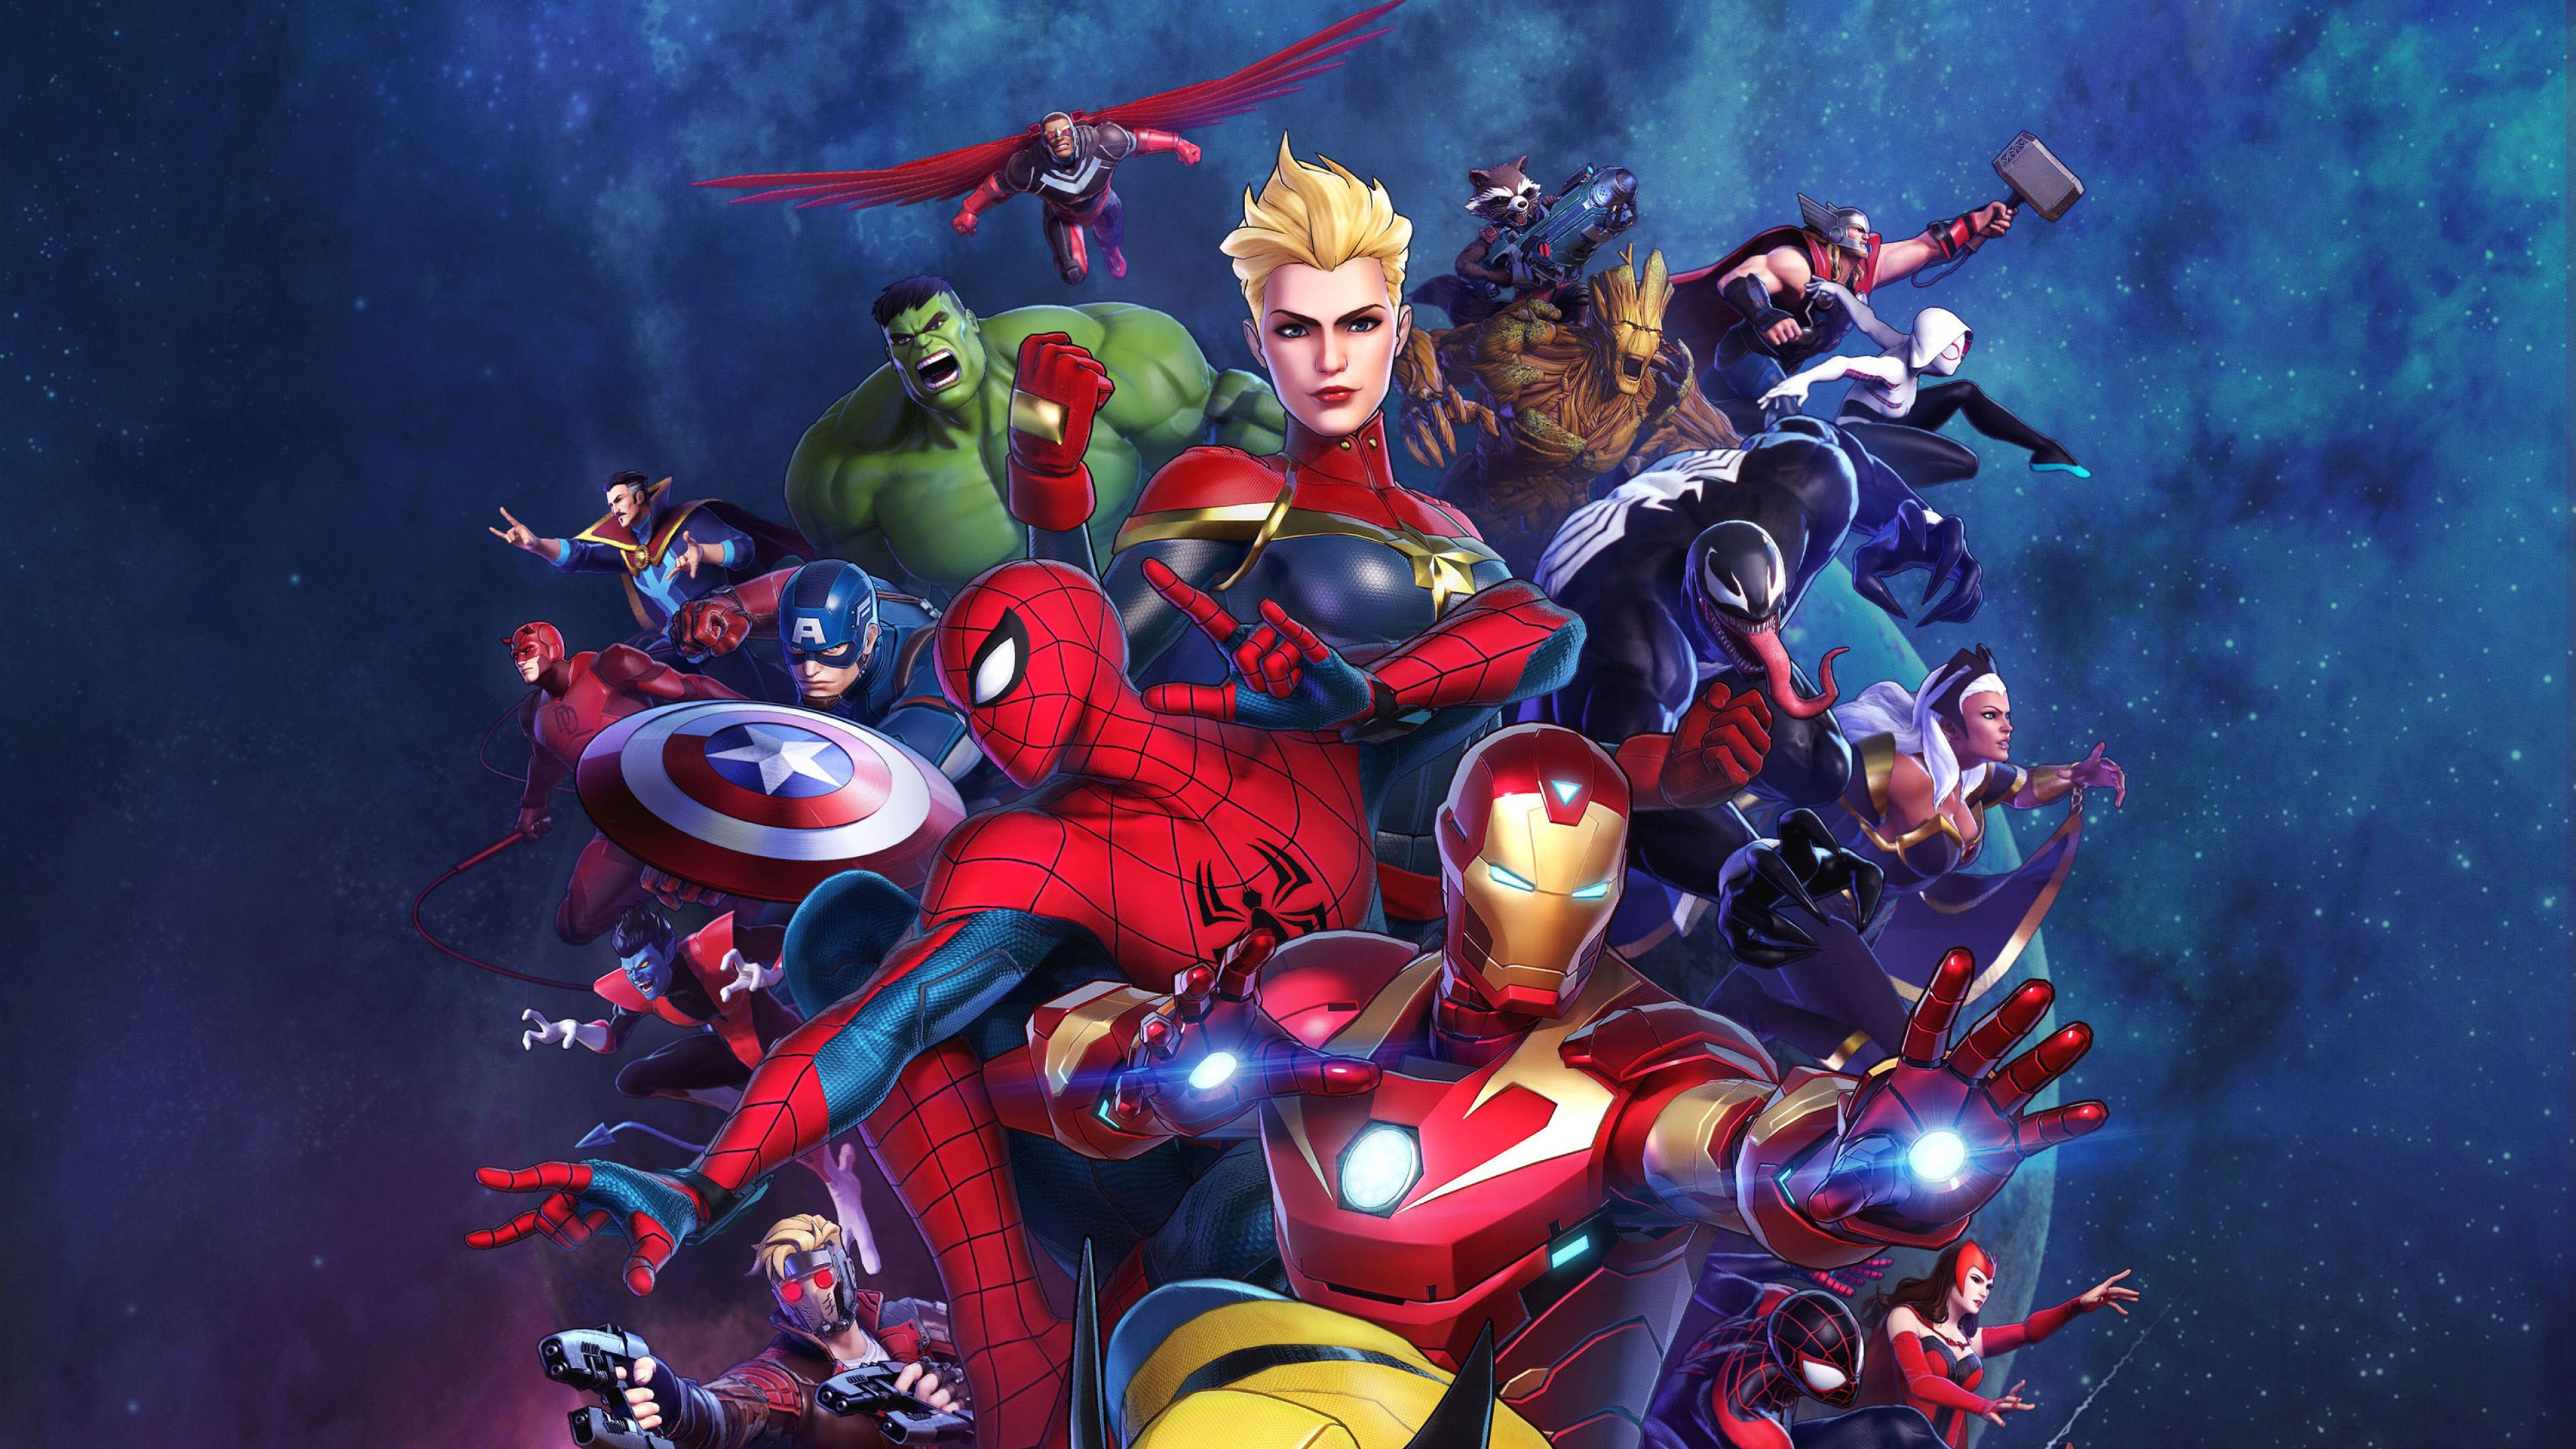 Wallpapers 4k Para Pc Marvel : 4k Marvel Wallpapers Hd Background ...